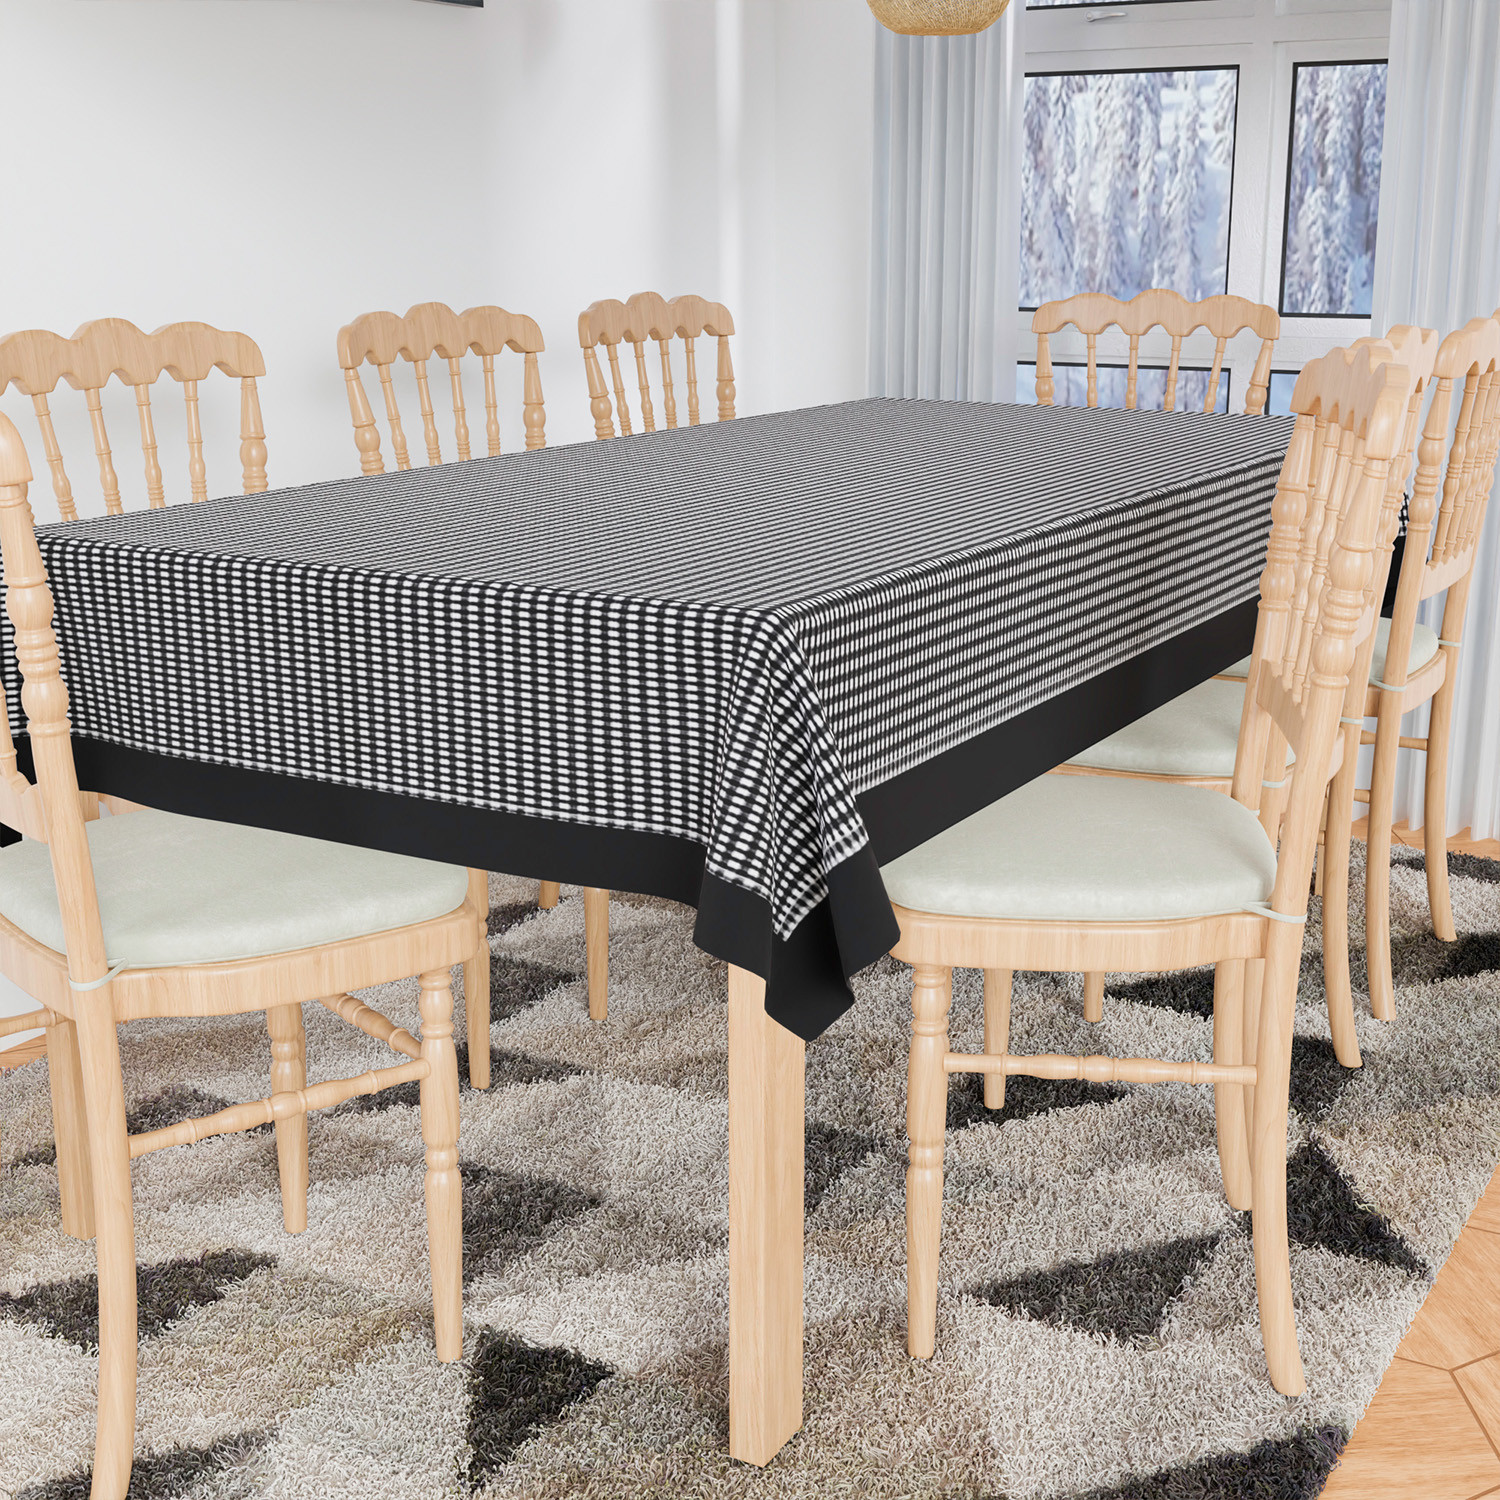 Kuber Industries Dining Table Cover | Cotton Table Cloth Cover | 8 Seater Table Cloth | Barik Check Table Cover | Table Protector | Table Cover for Dining Table | 60x108 Inch | DTC | Black